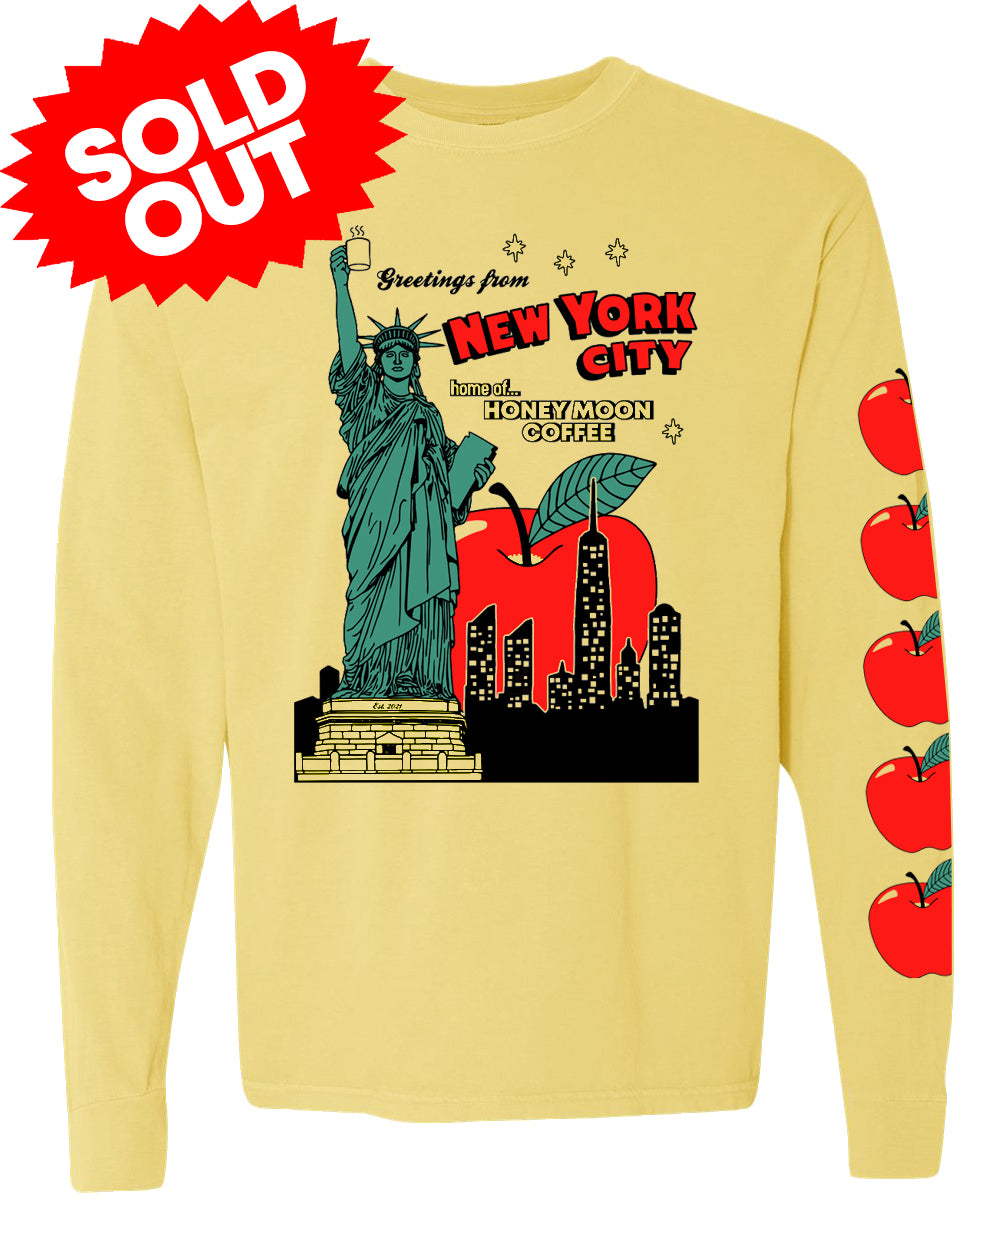 Greetings From New York Shirt (Yellow Long Sleeve)